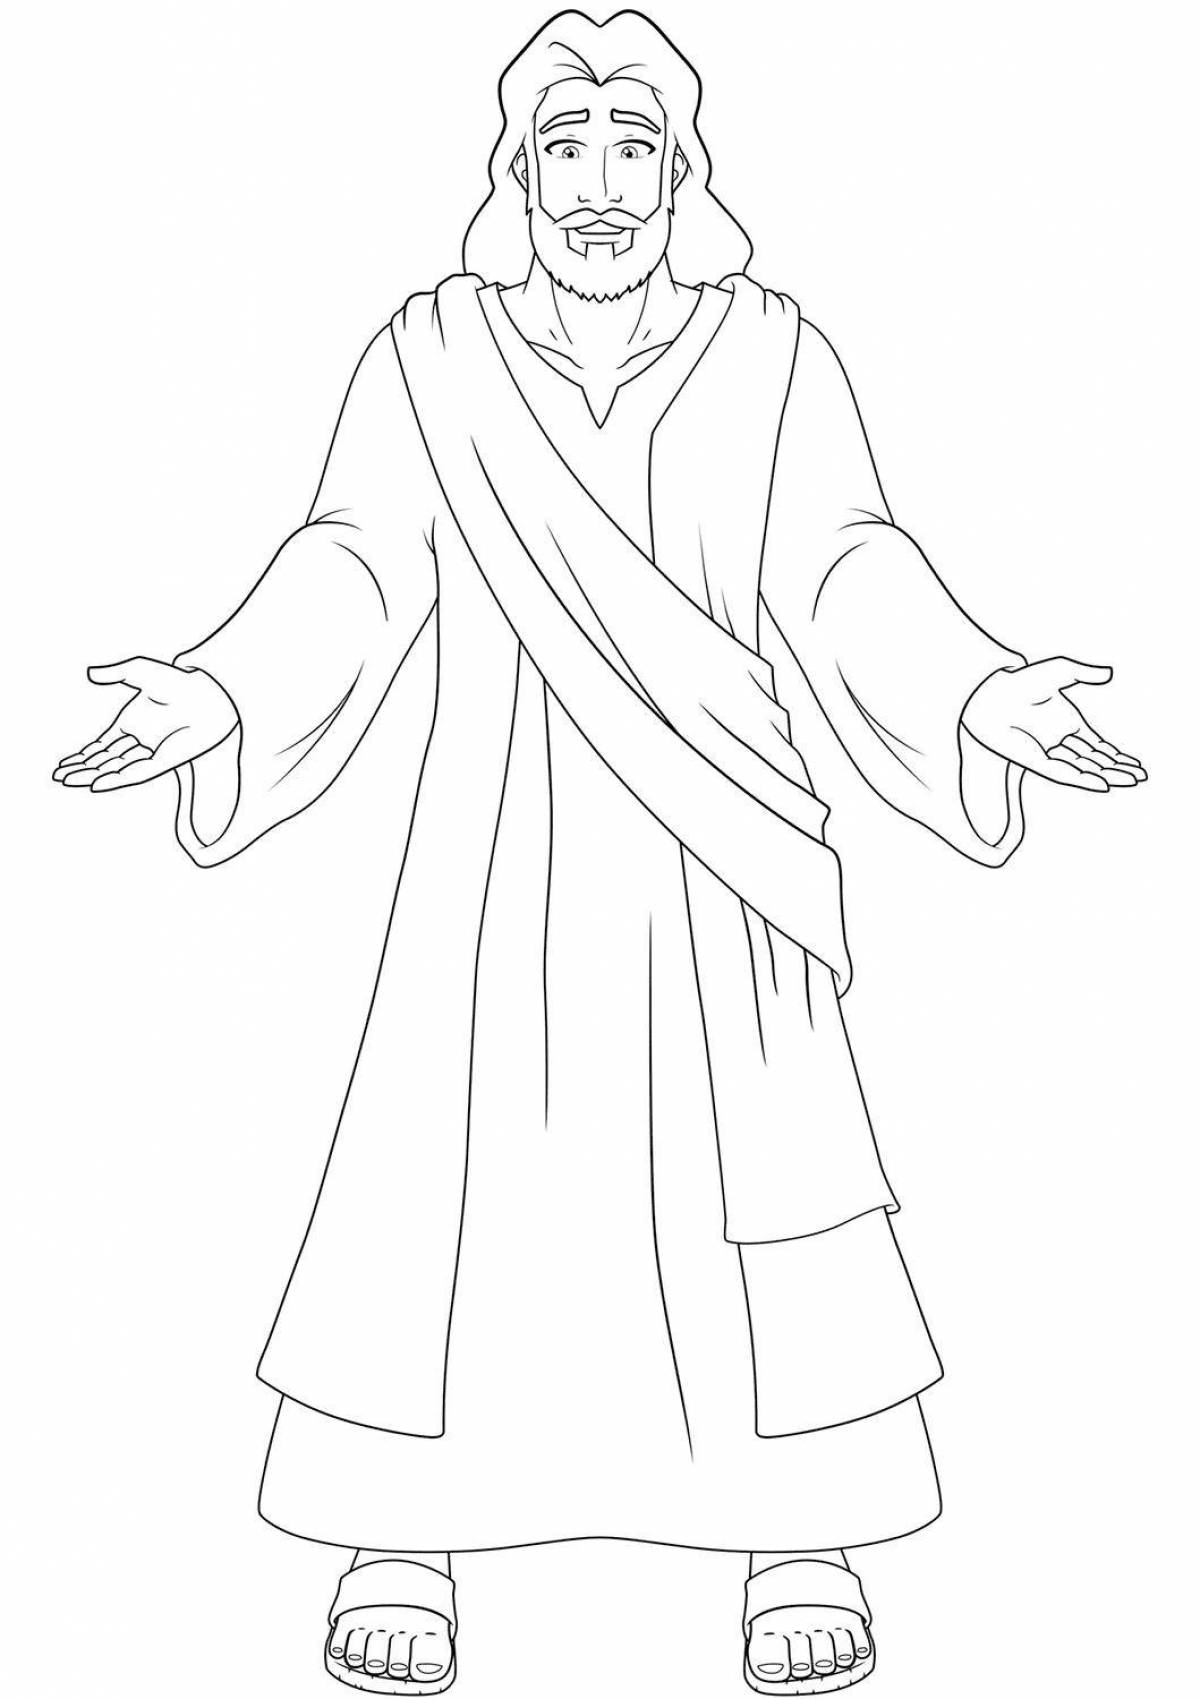 Playful jesus coloring page for kids